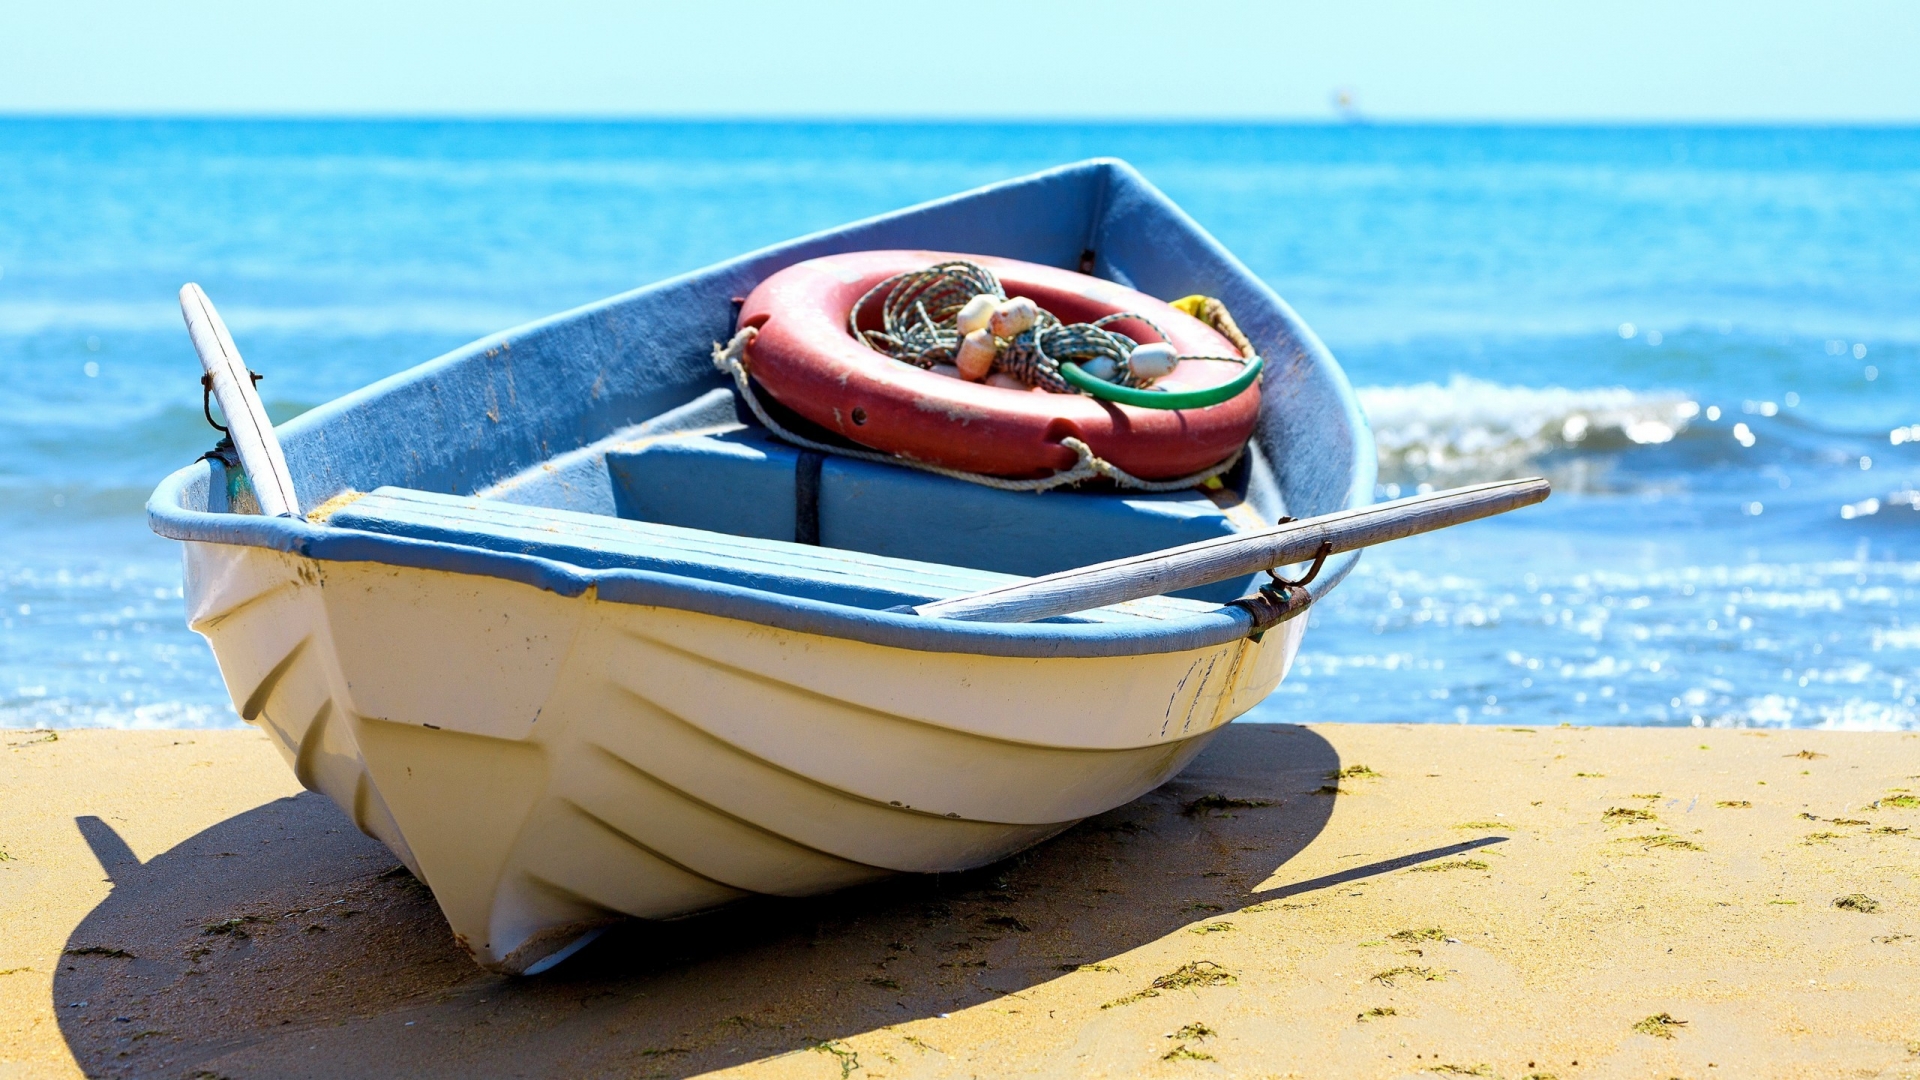 Old Boat on the Beach for 1920 x 1080 HDTV 1080p resolution